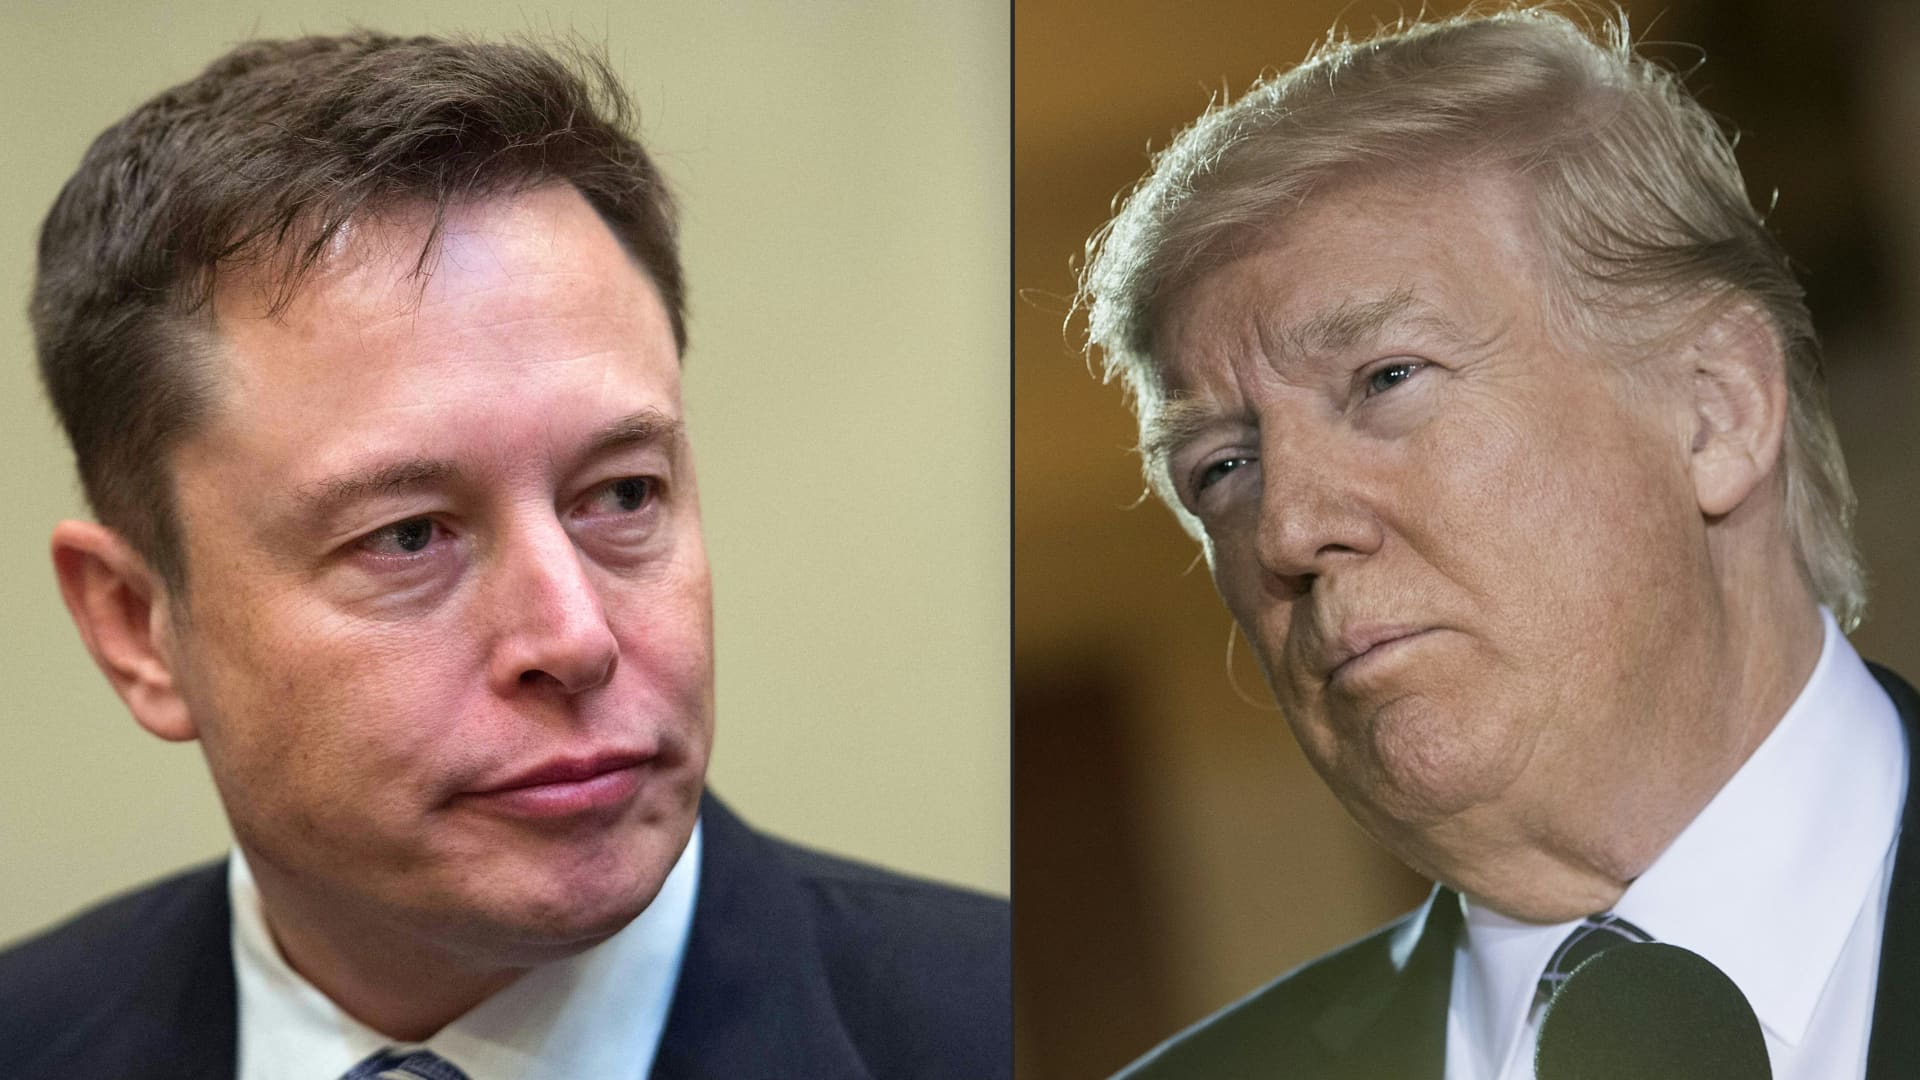 Elon Musk says Trump ‘came by’ while he was eating breakfast, did not ask for money